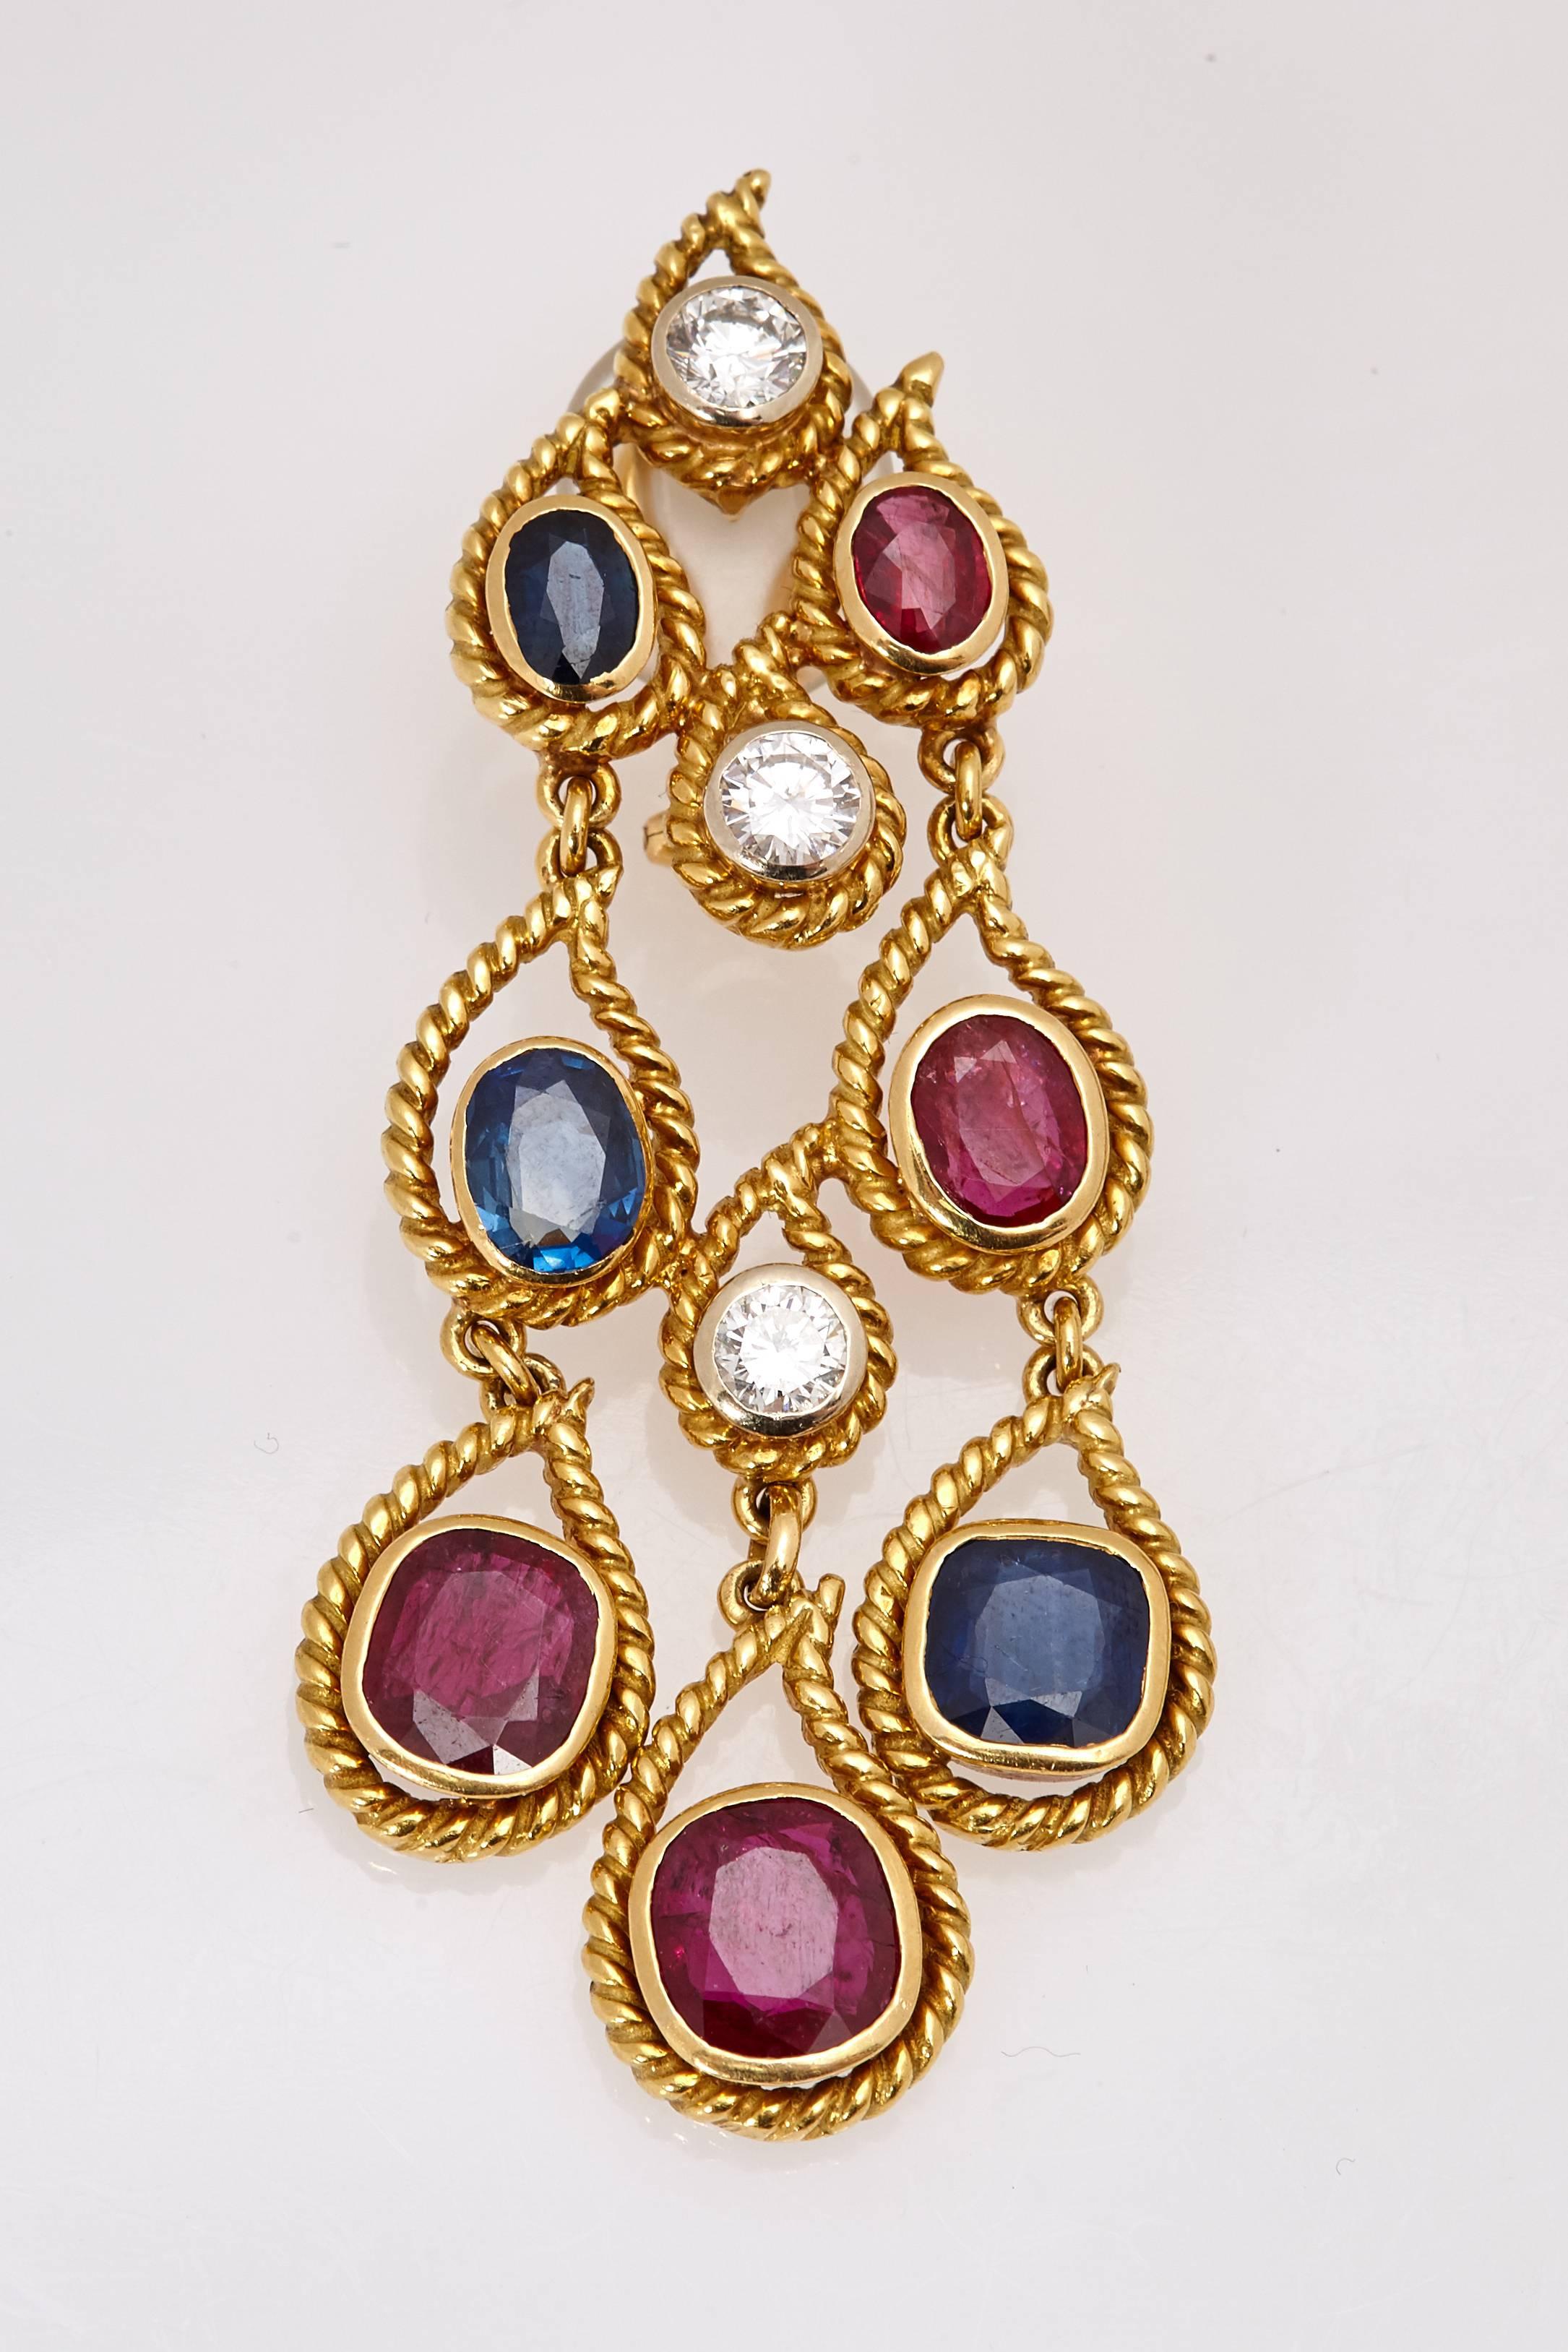 A pair of rope design rubies, sapphires and diamond ear pendants, mounted on 18kt yellow gold. Made in Italy, circa 1975.